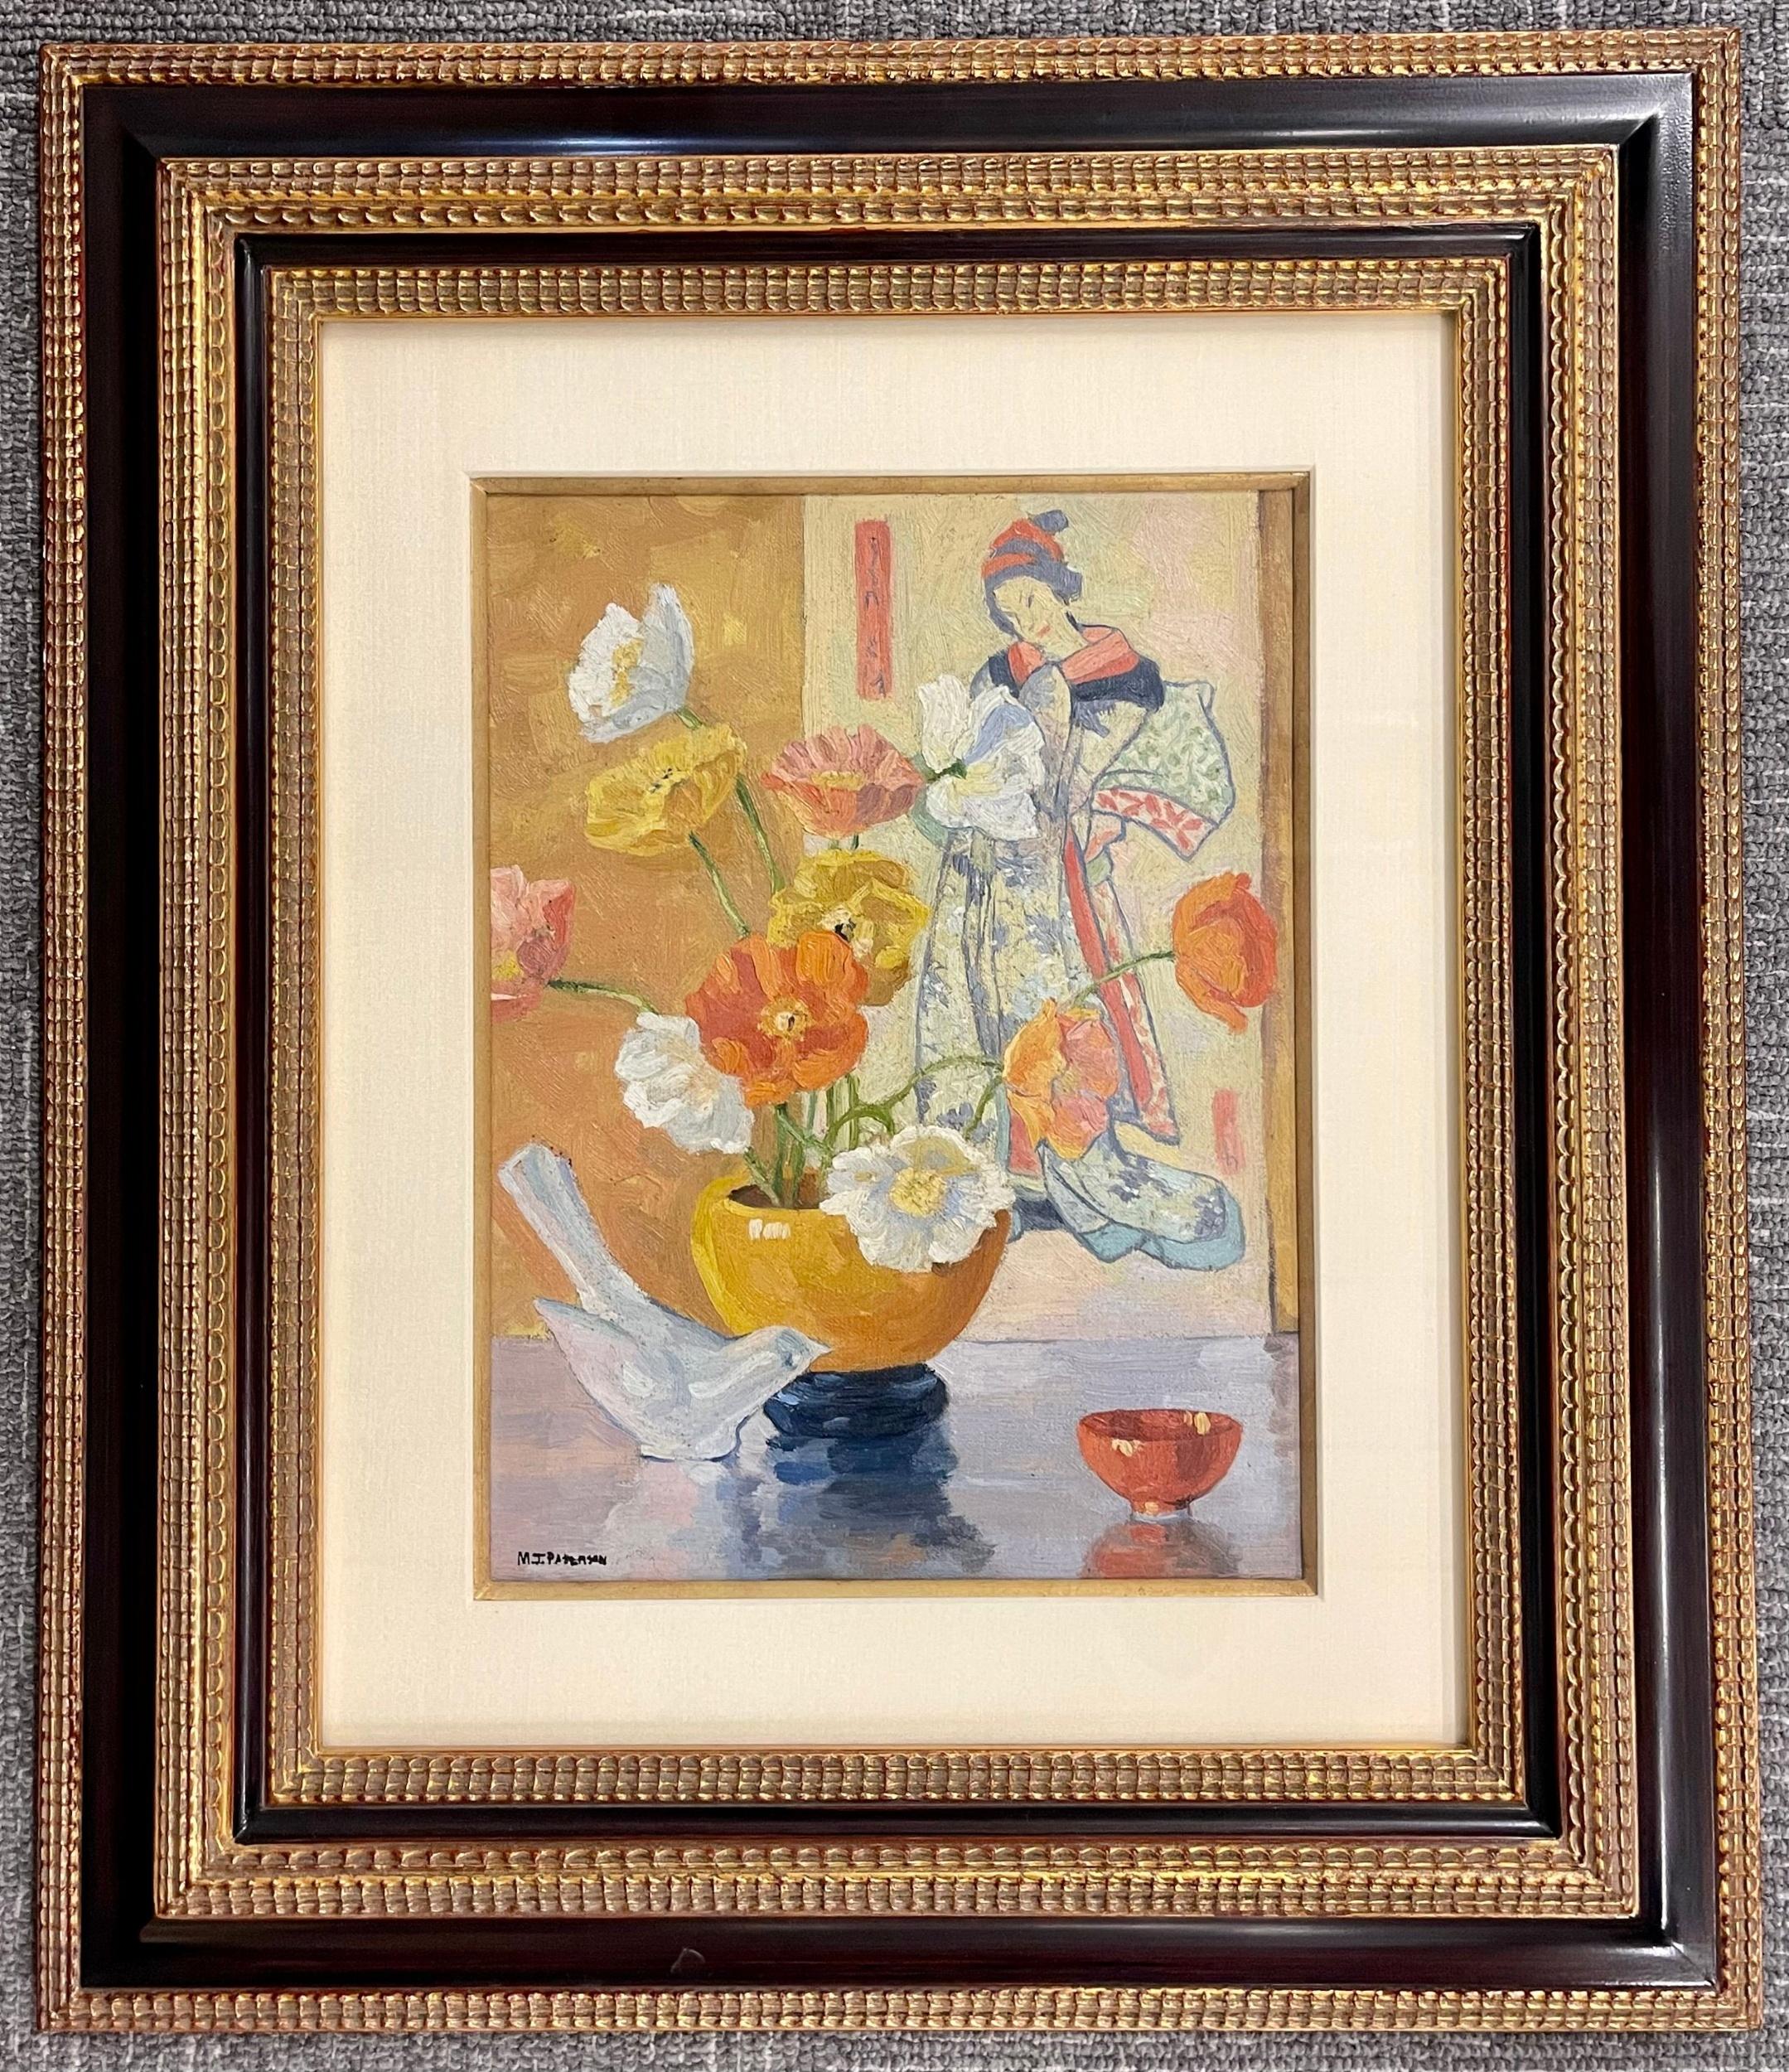 A finely painted oil on canvas signed lower right M J Patterson. Margaret Jordan Patterson (American, 1867-1950) Still life oil on canvas of a vase with flowers having a love bird on a tale with a Geisha girl painting in the background. The whole in